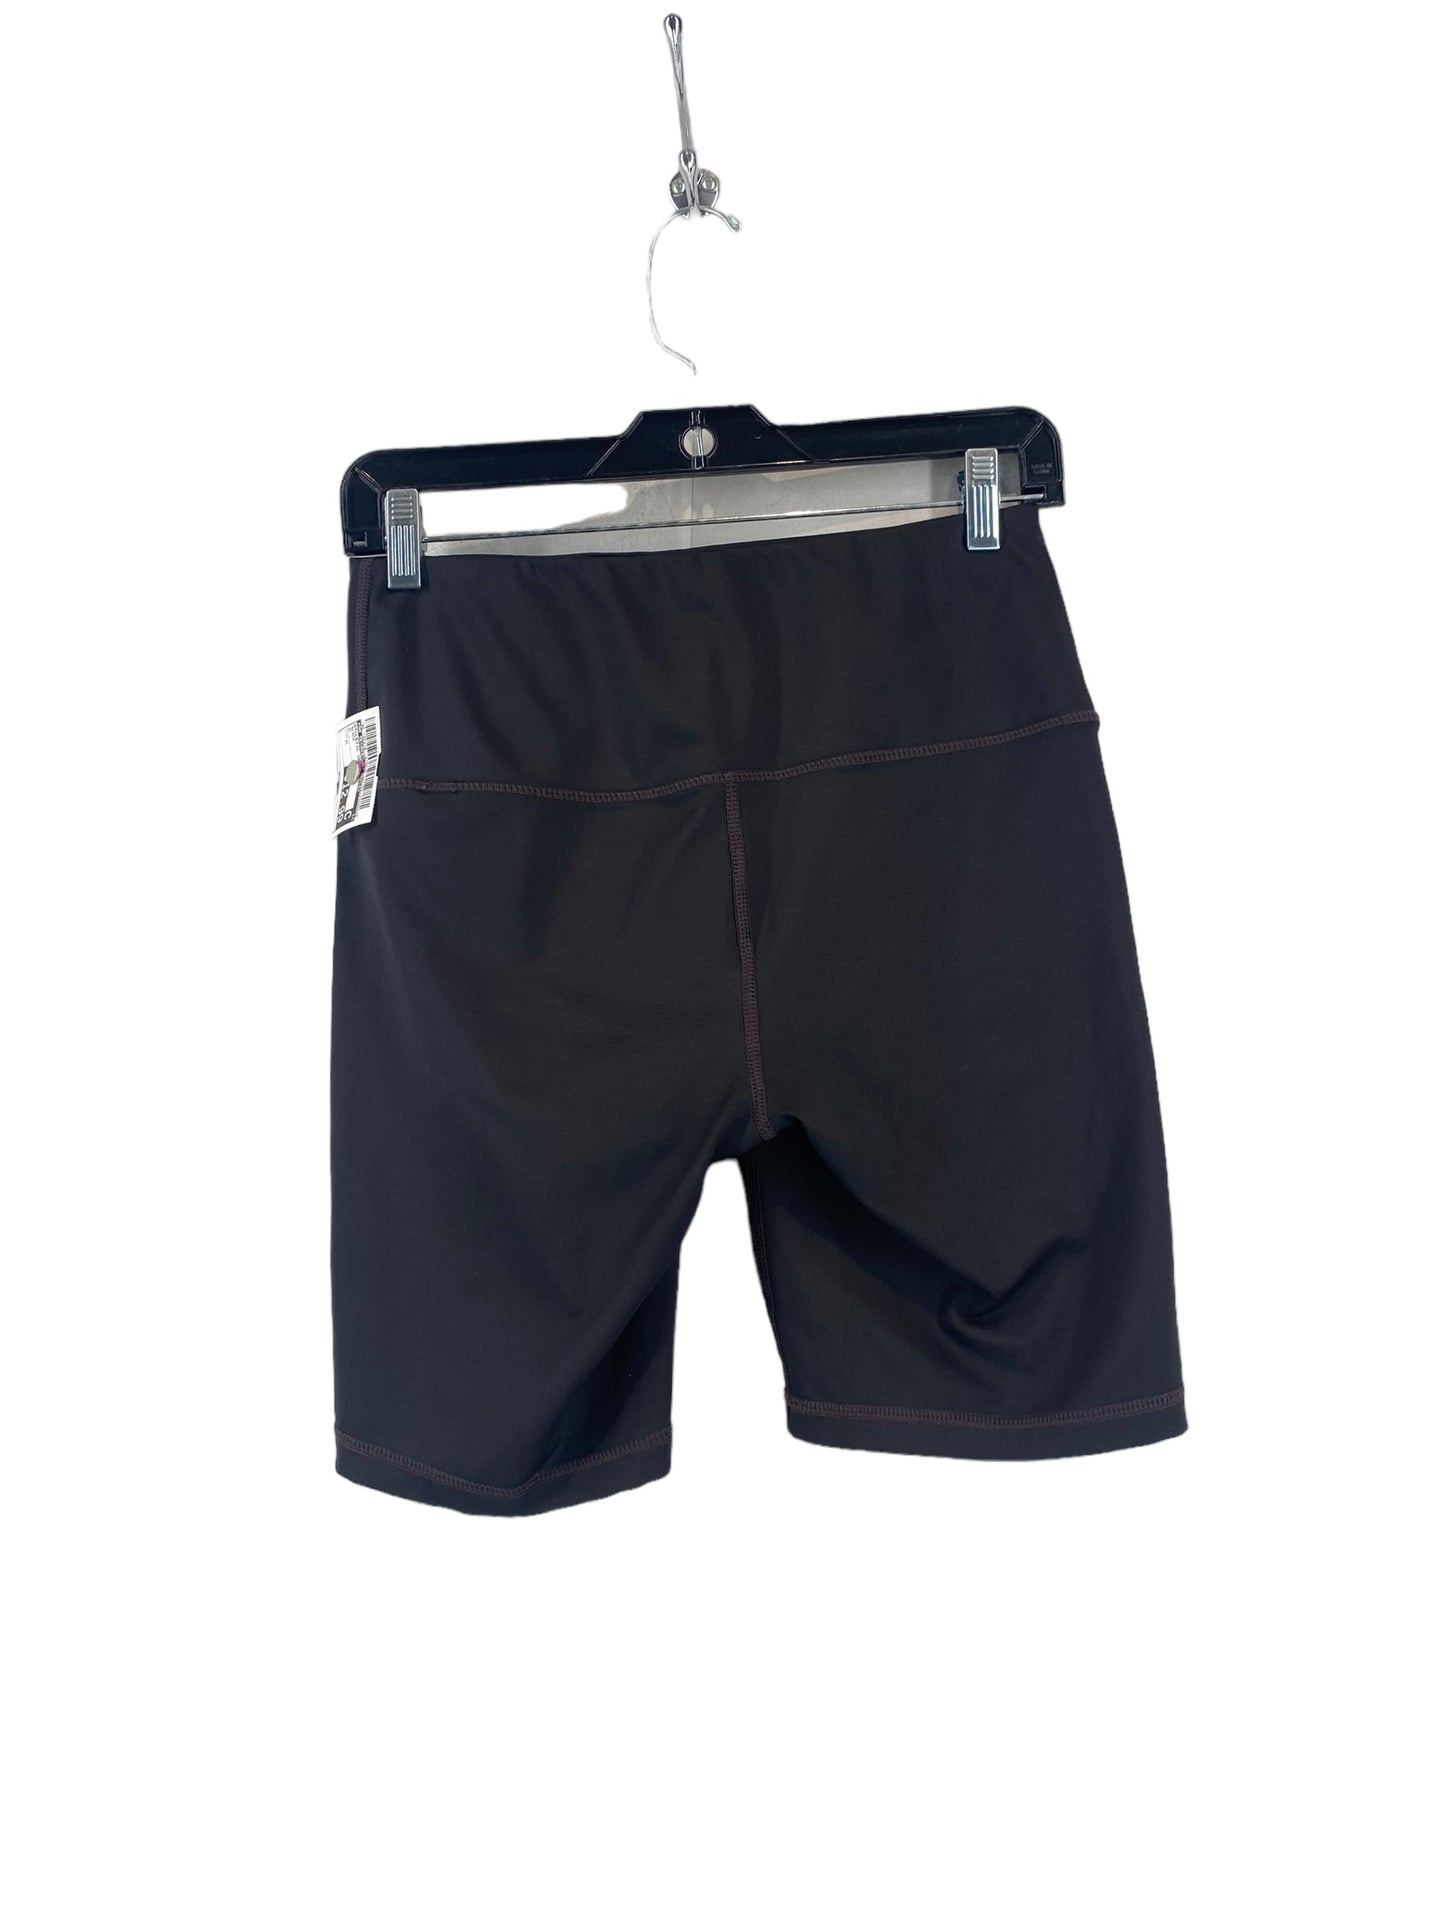 Athletic Shorts By 90 Degrees By Reflex  Size: M